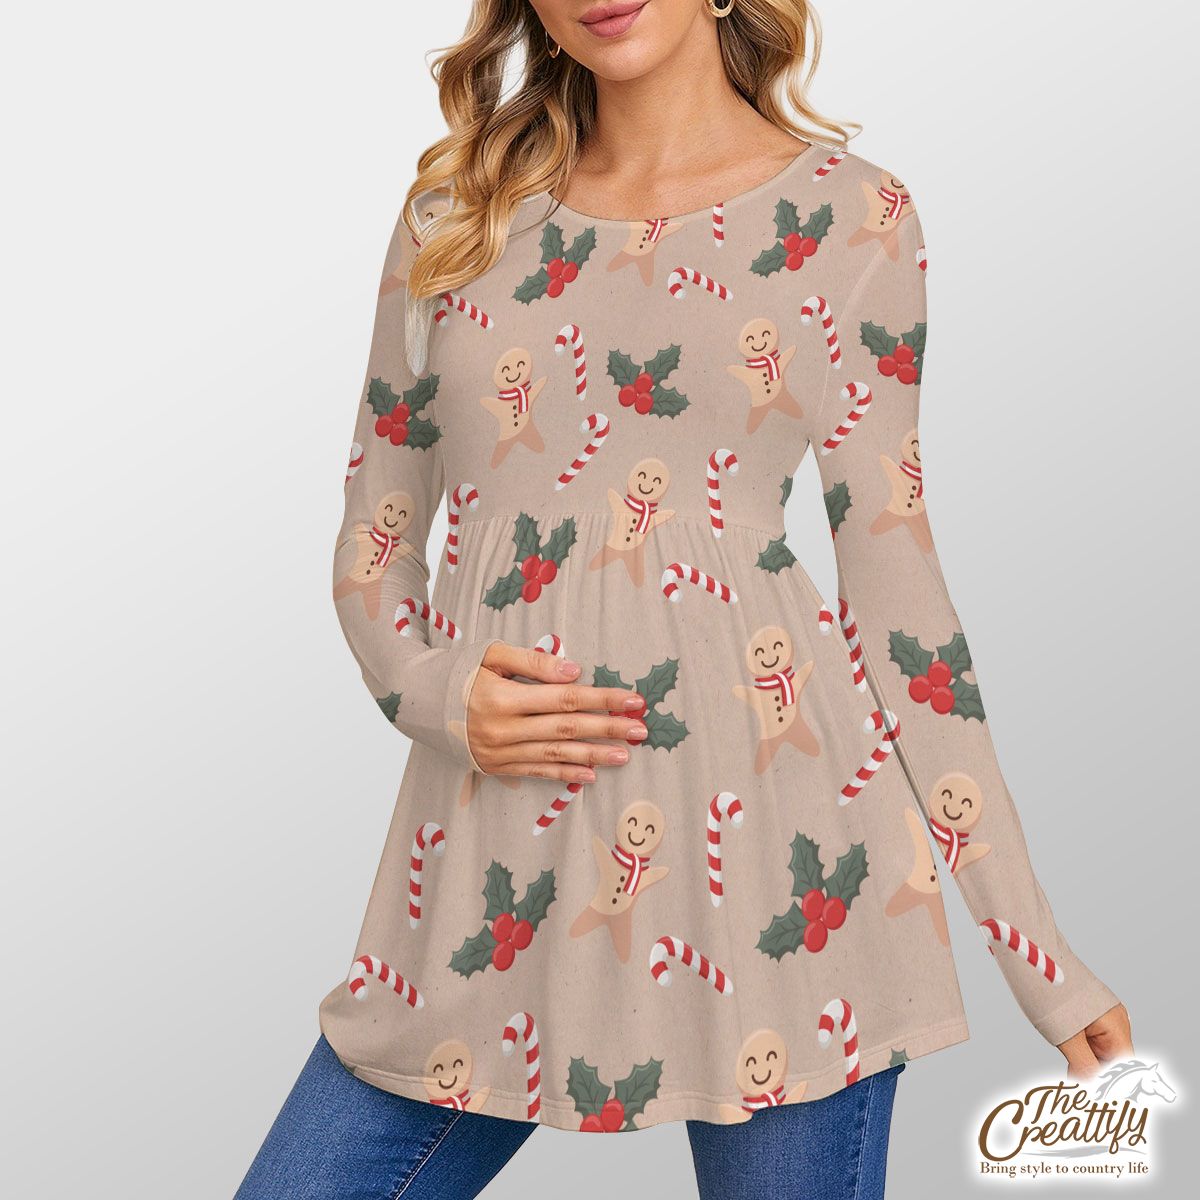 Candy Cane, Holly Leaf, Gingerbread Man Skirt Top